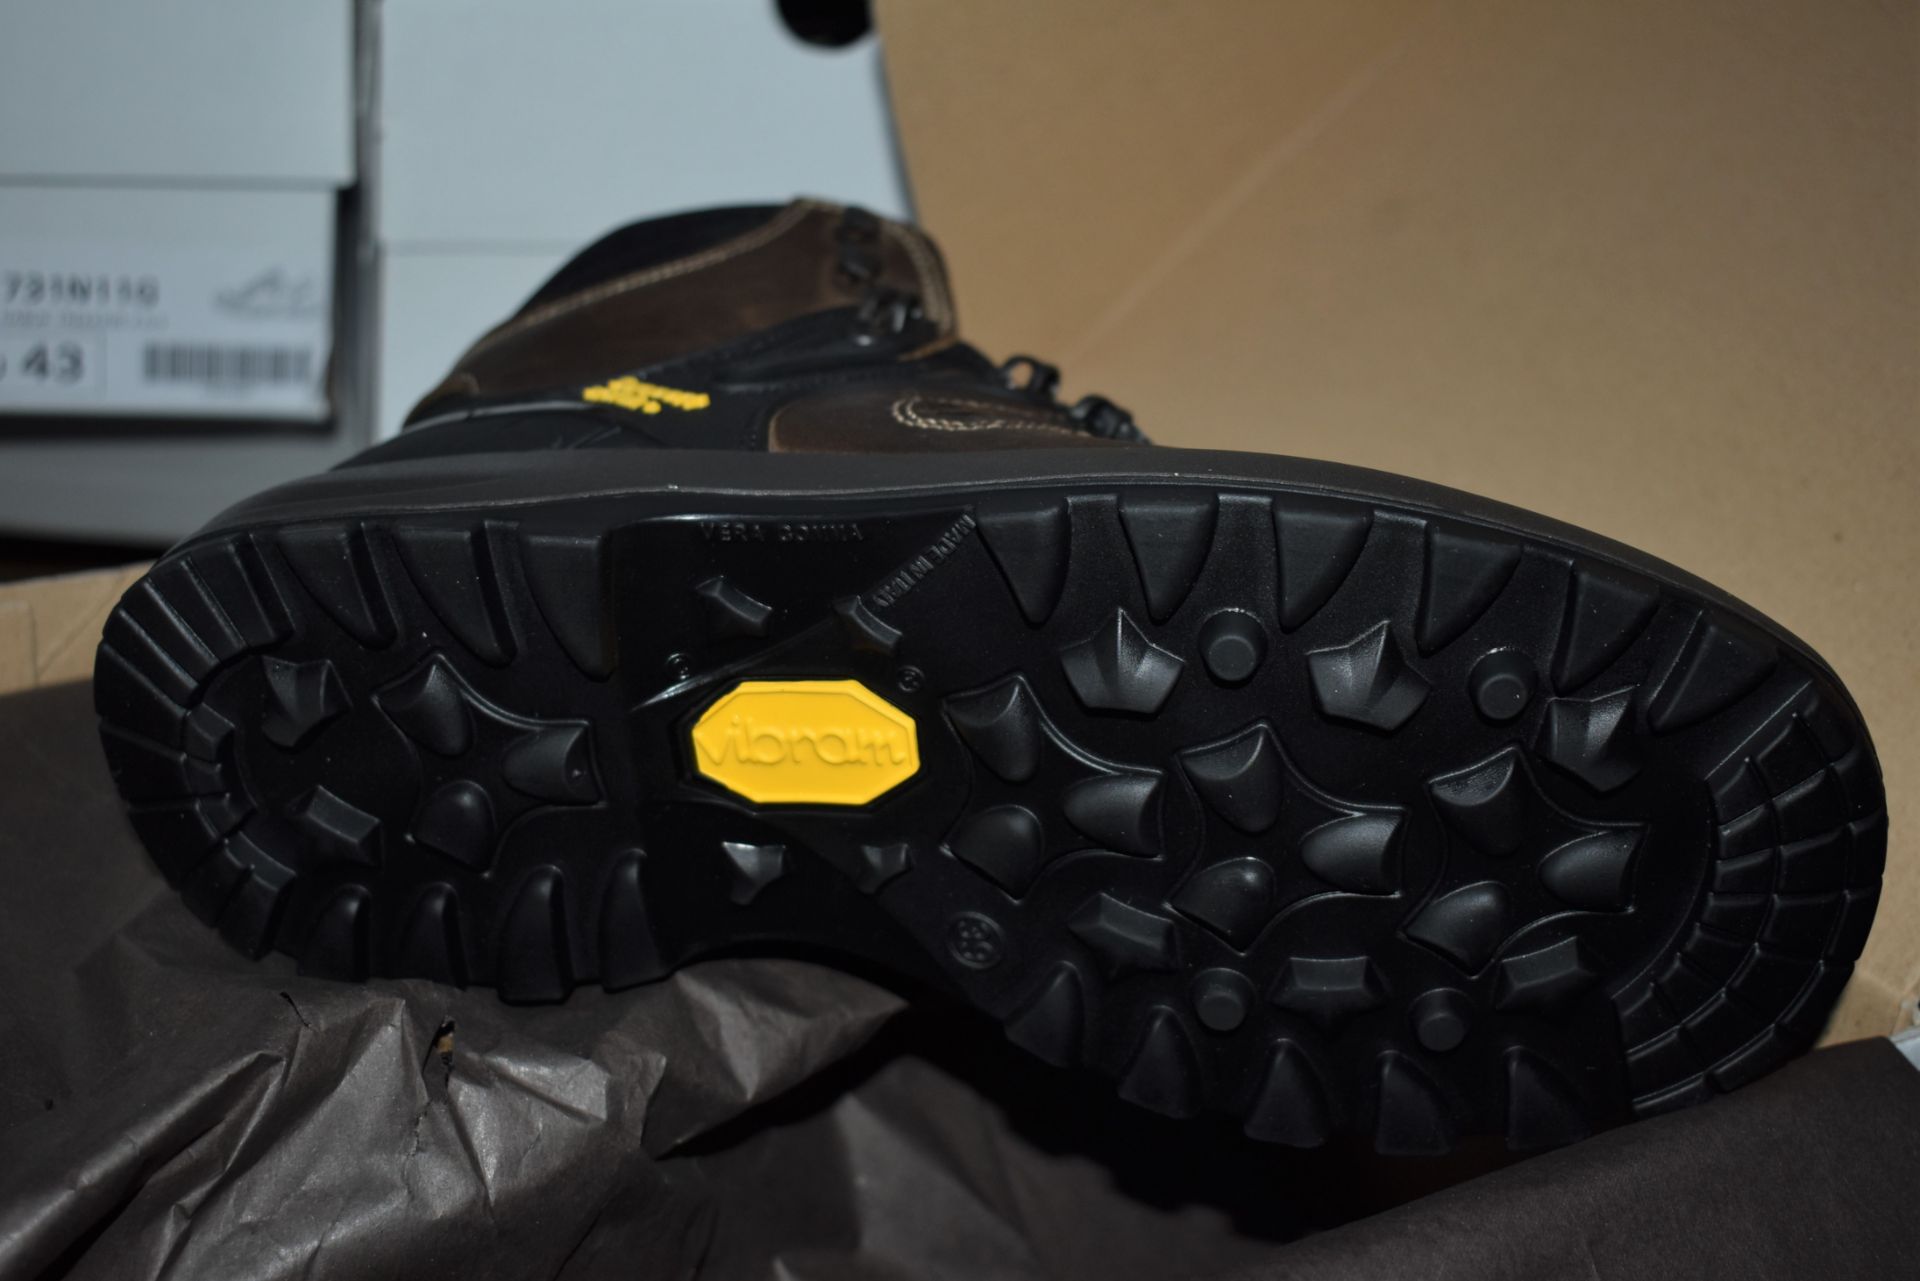 1 x Pair of Mens VIBRAM Walking Boots - Outdoor Pro Spo-Tex Trekking Boots With Support System - - Image 2 of 4